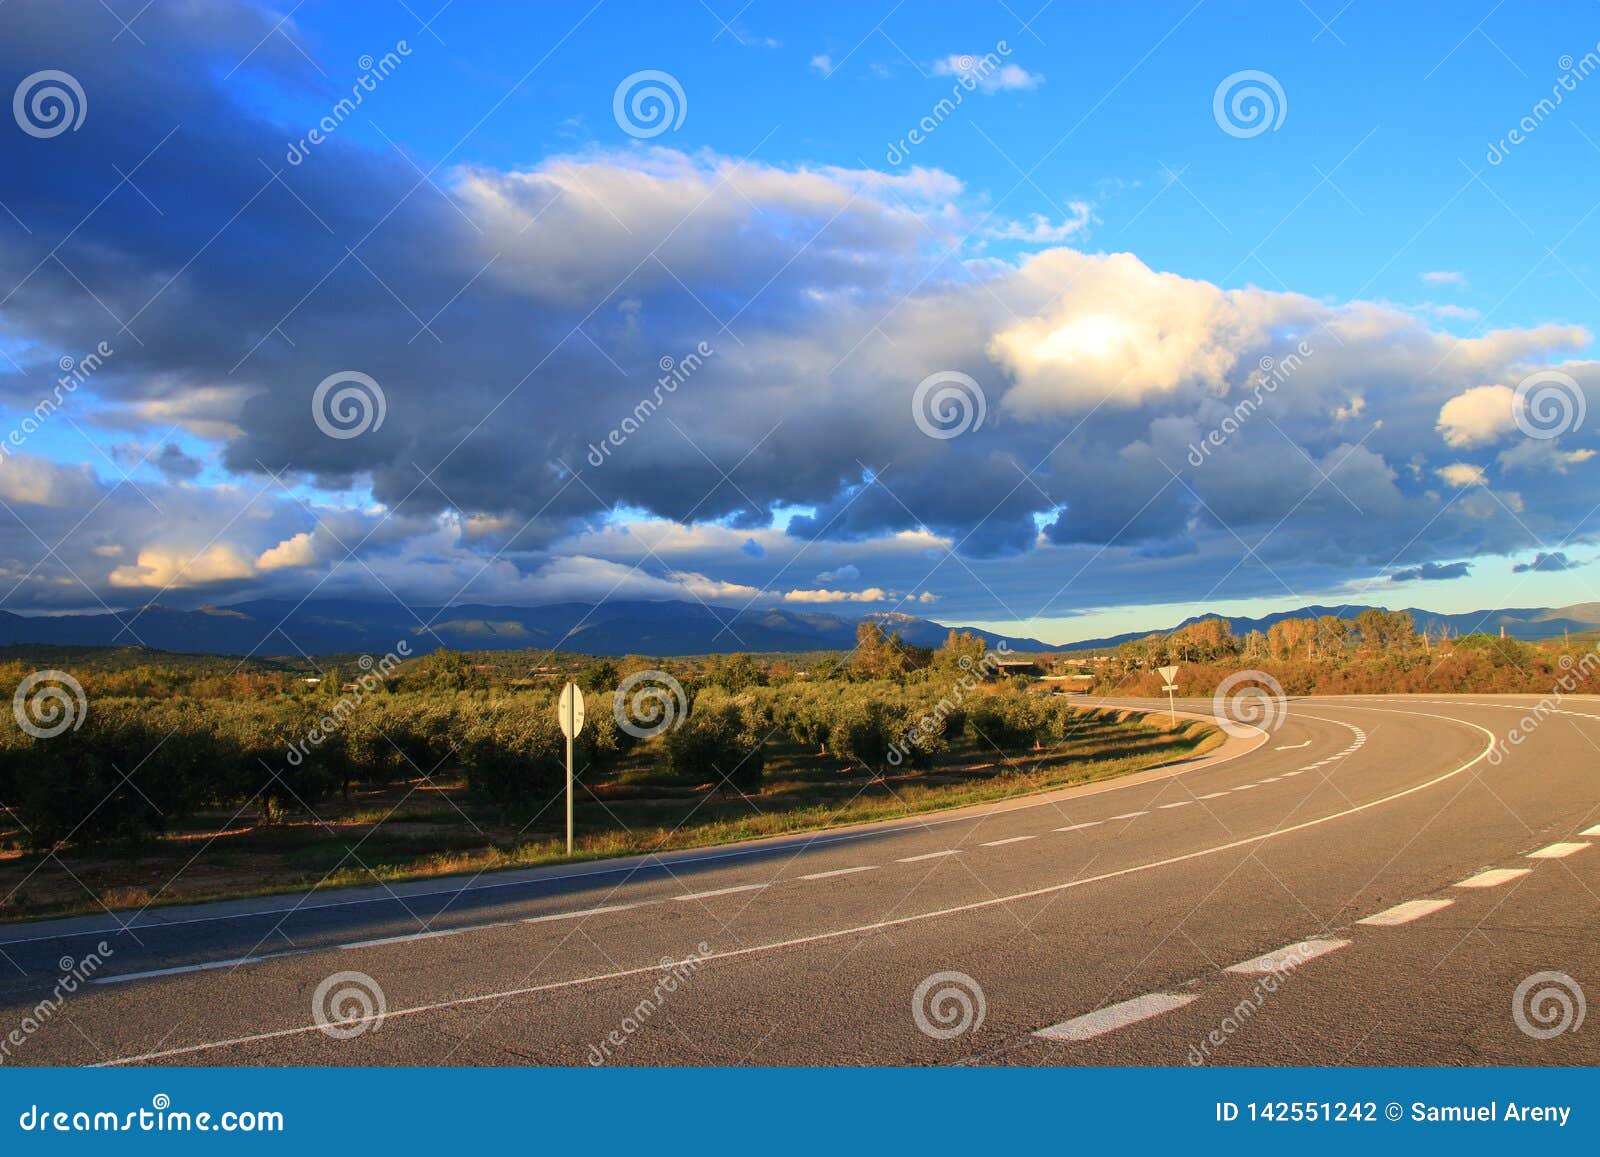 spanish road and clouds in countryside, catalunia